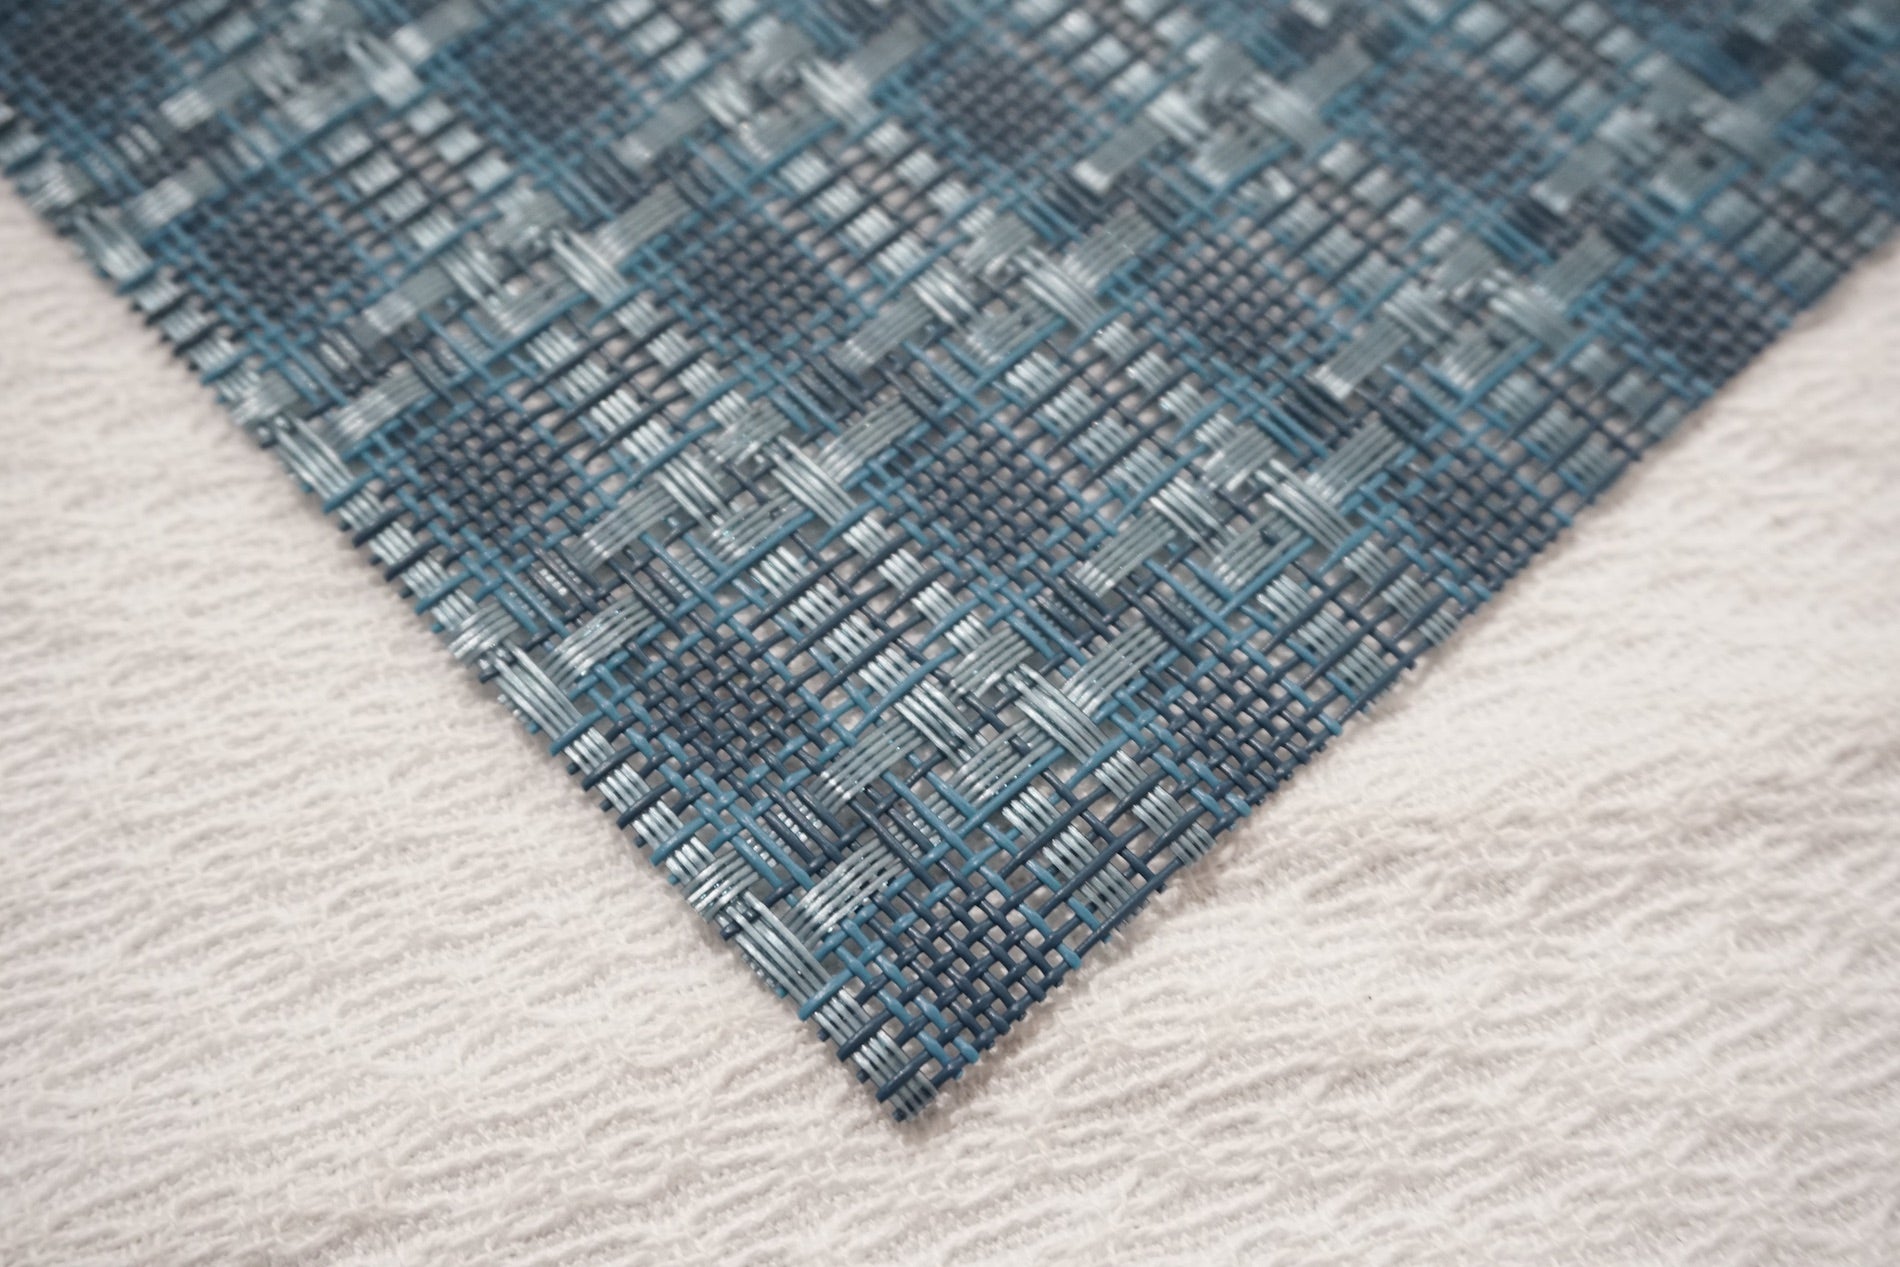 Dainty Home Checkers Woven Textilene Crossweave With Textured Geometric Checkers Pattern Reversible 13" x 19" Rectangular Placemats